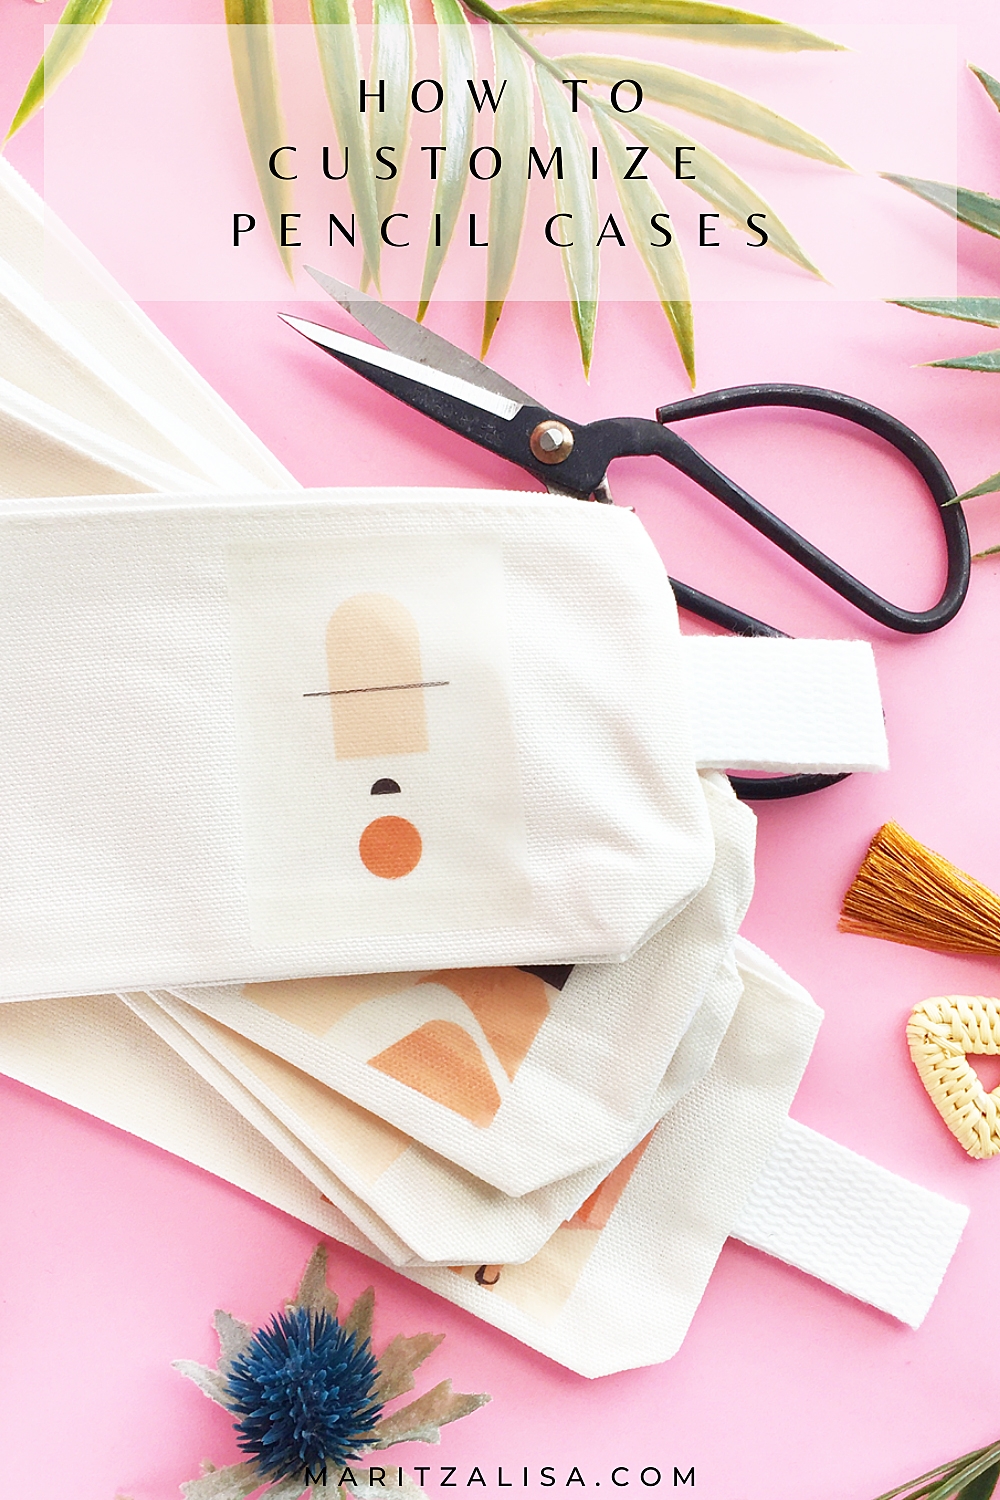 How To Customize Pencil Cases